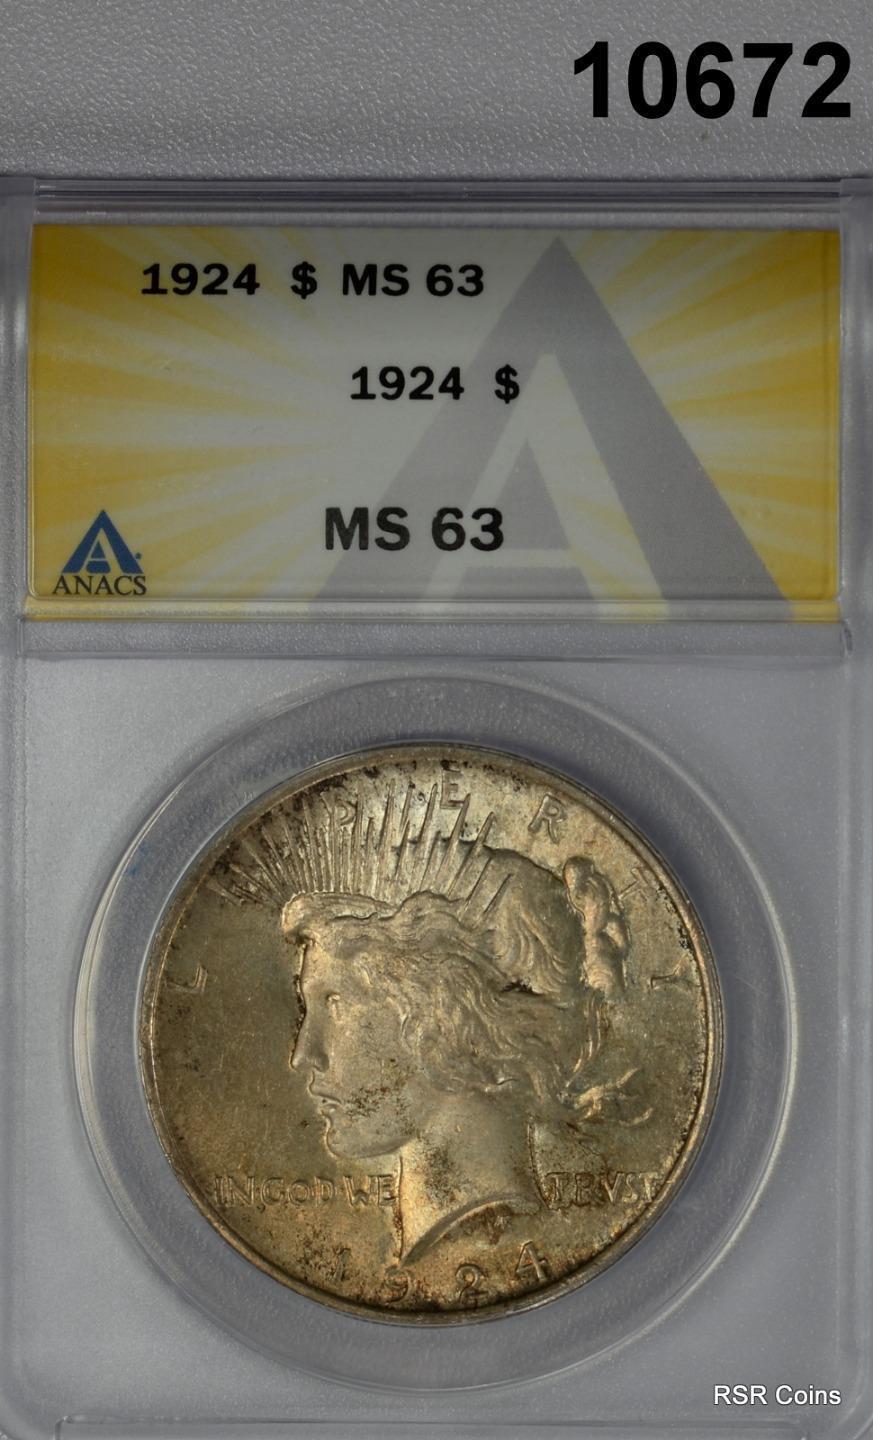 1924 PEACE SILVER DOLLAR ANACS CERTIFIED MS63 GOLDEN! #10672